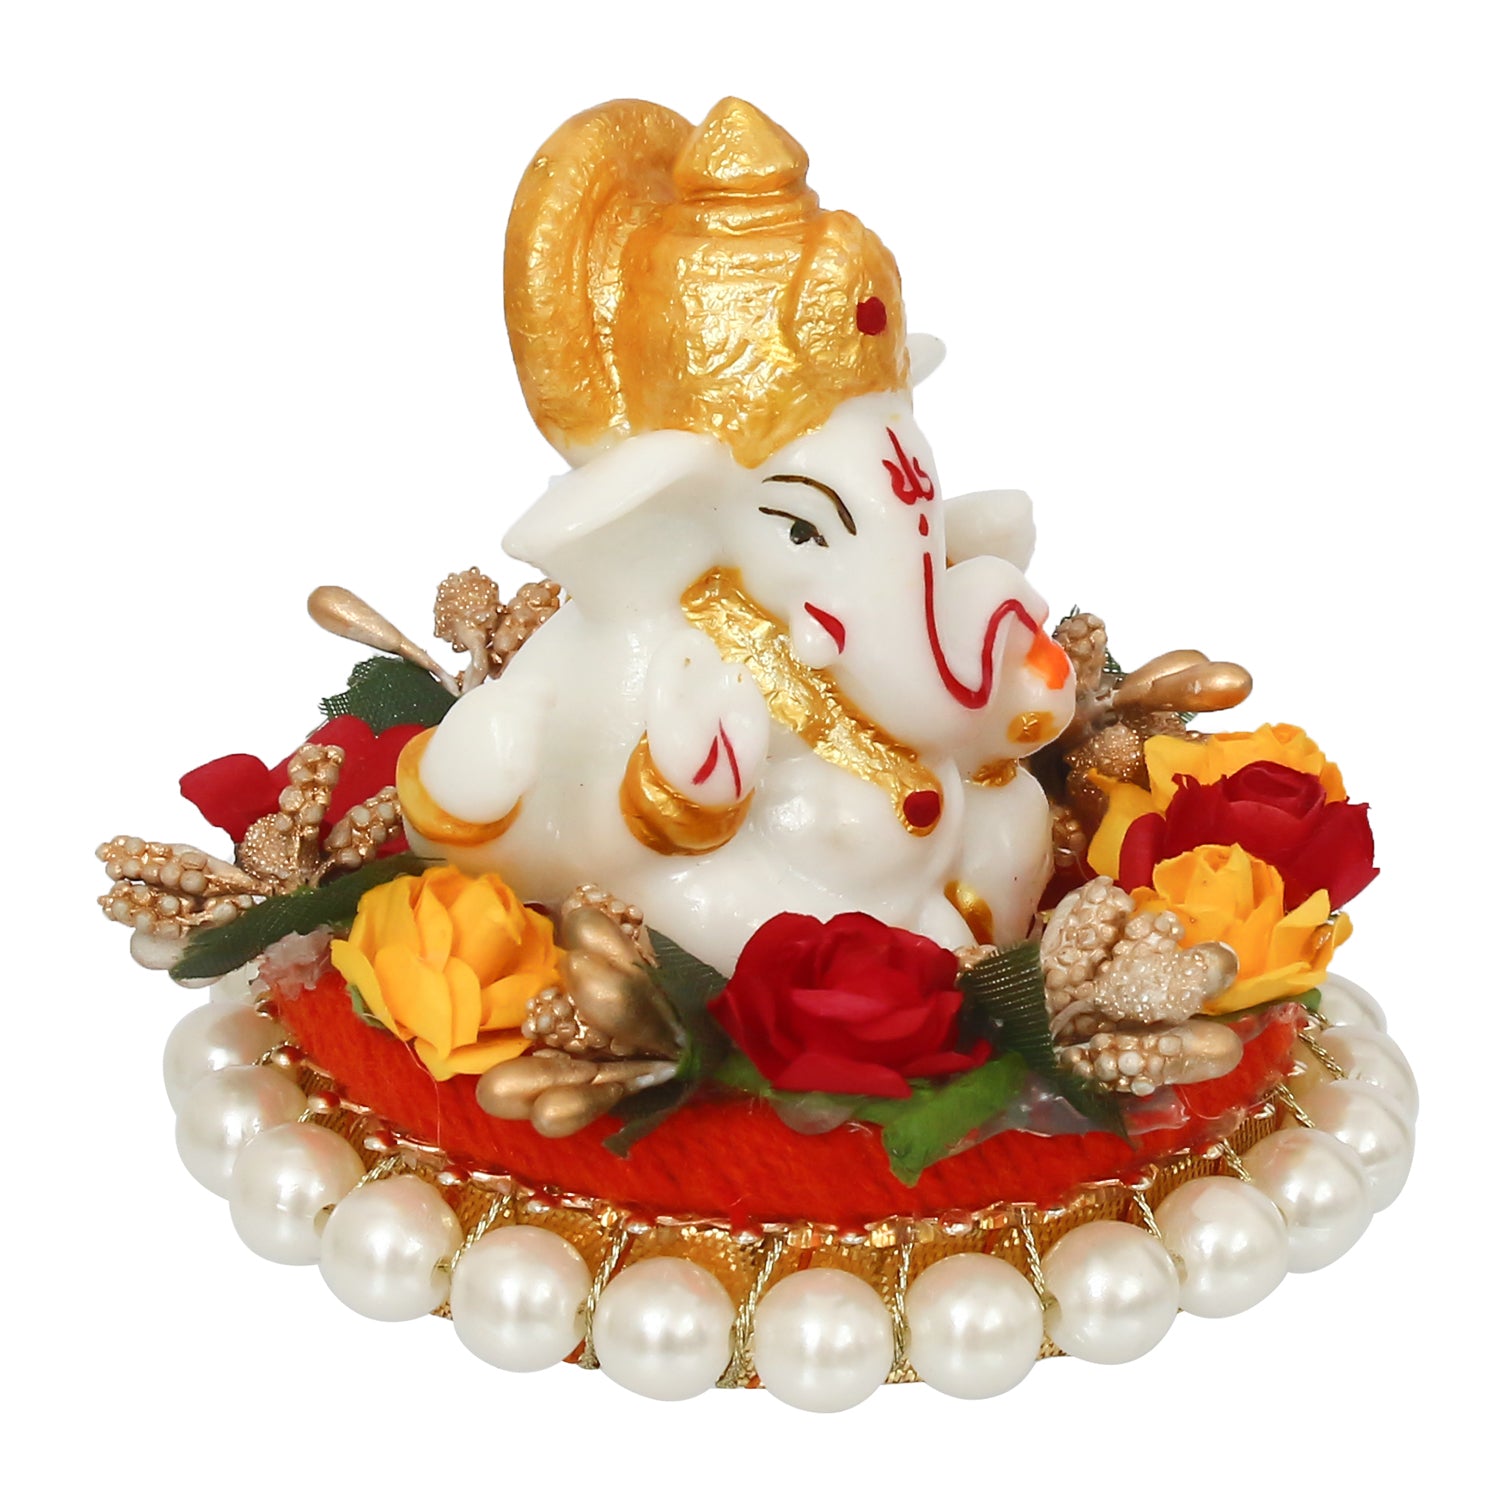 Polyresin Lord Ganesha Statue on Decorative Handcrafted Plate for Home, Office and Car Dashboard 6